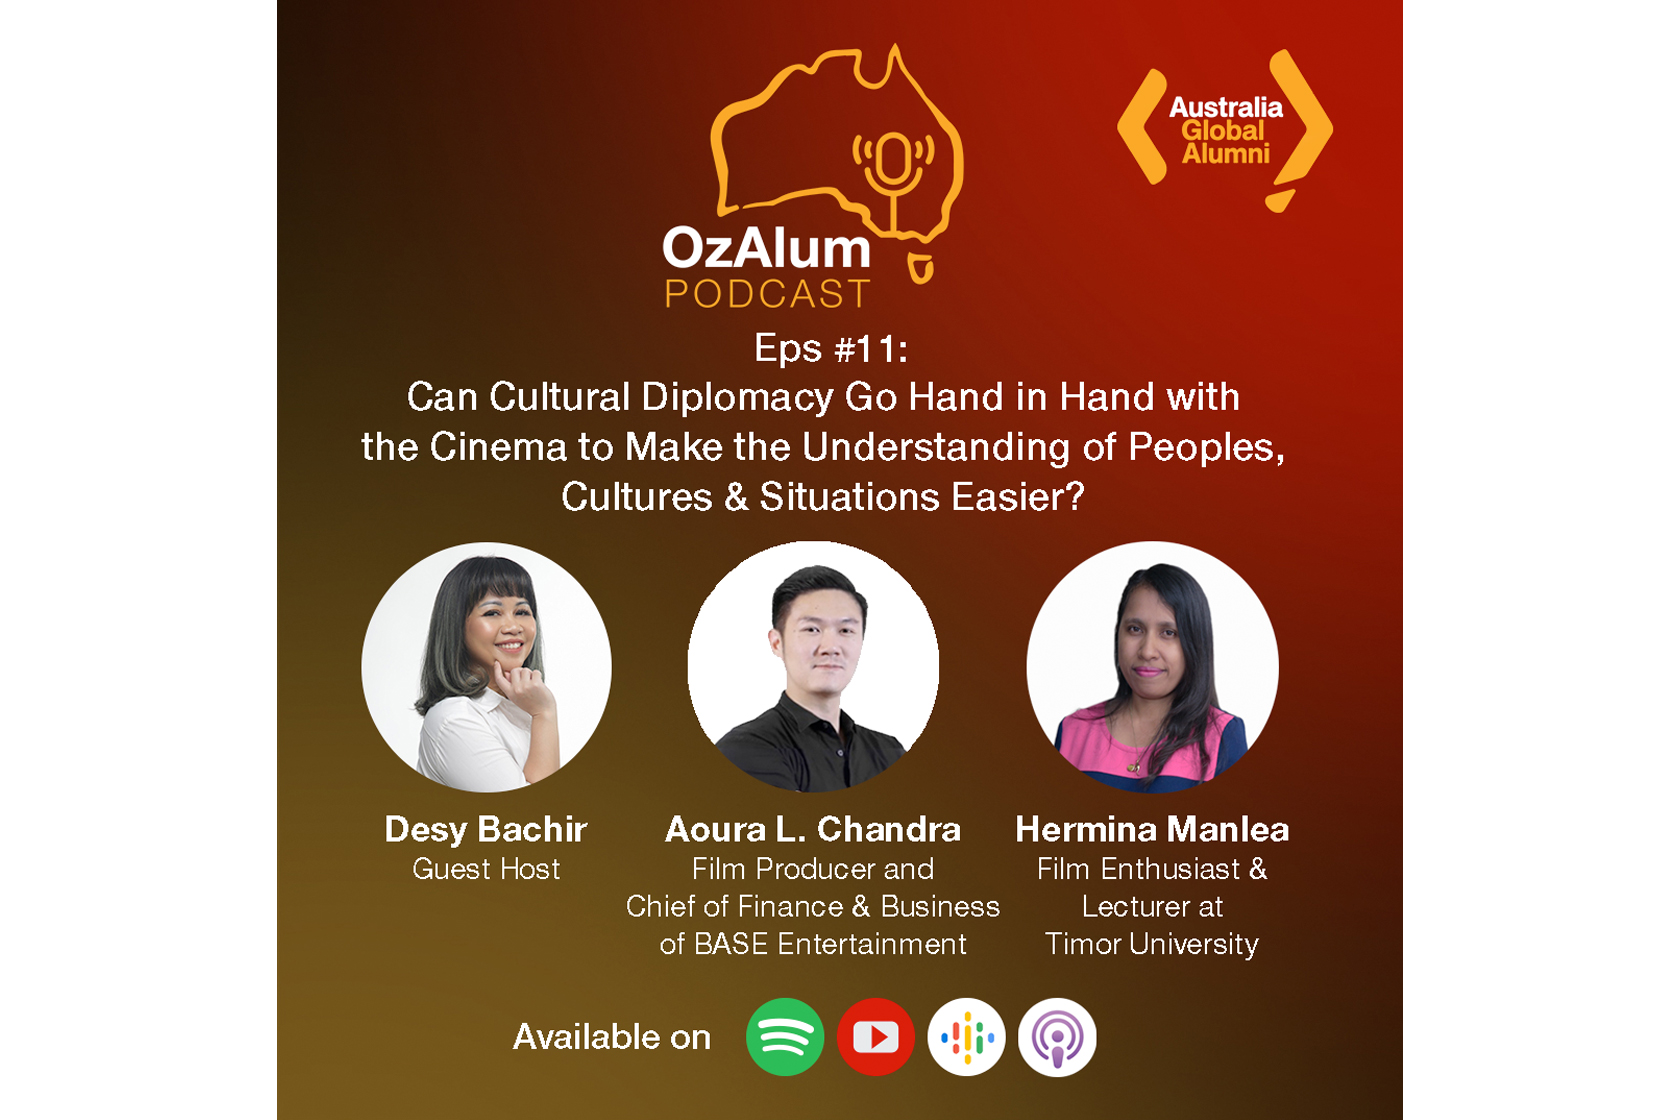 OzAlum Podscast Eps #11: Can Cultural Diplomacy Go Hand in Hand with the Cinema to Make the Understanding of Peoples, Cultures and Situations Easier?